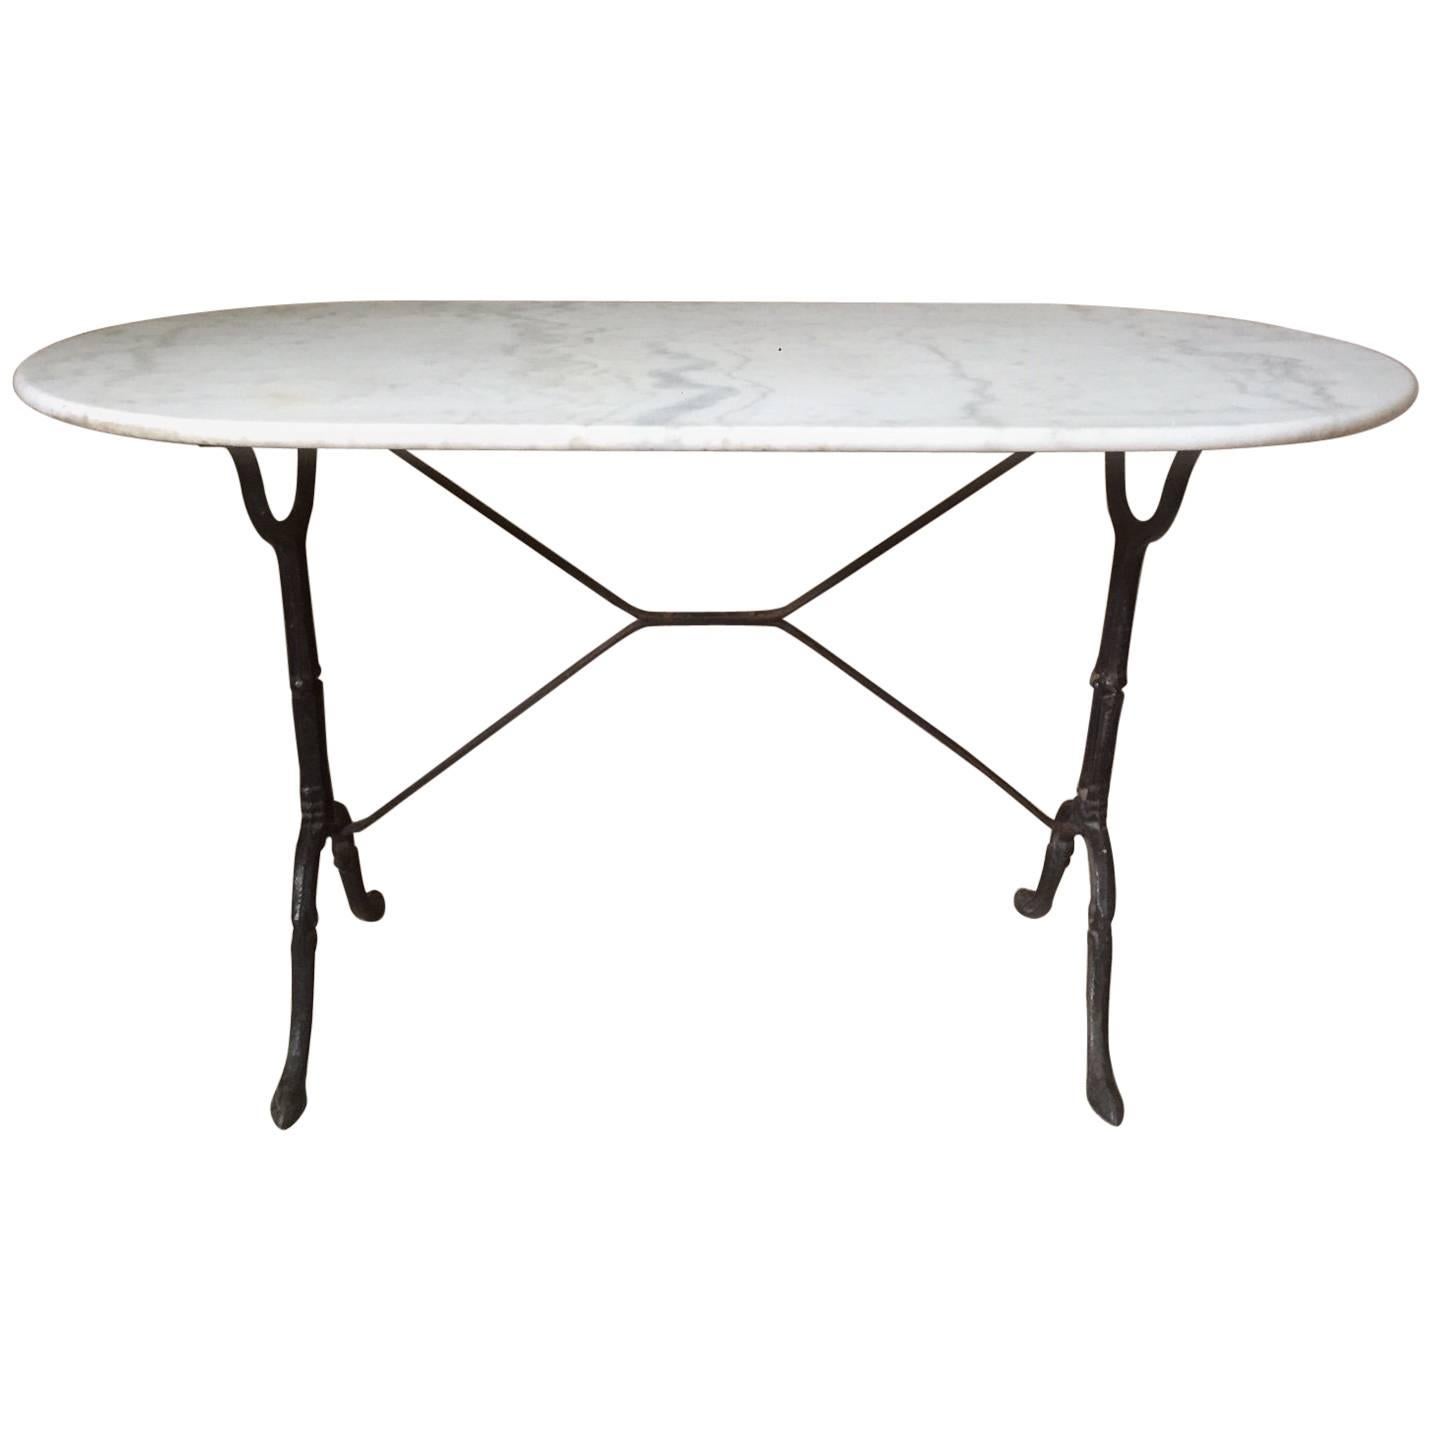 French Bistro Table with White Marble, 1940s